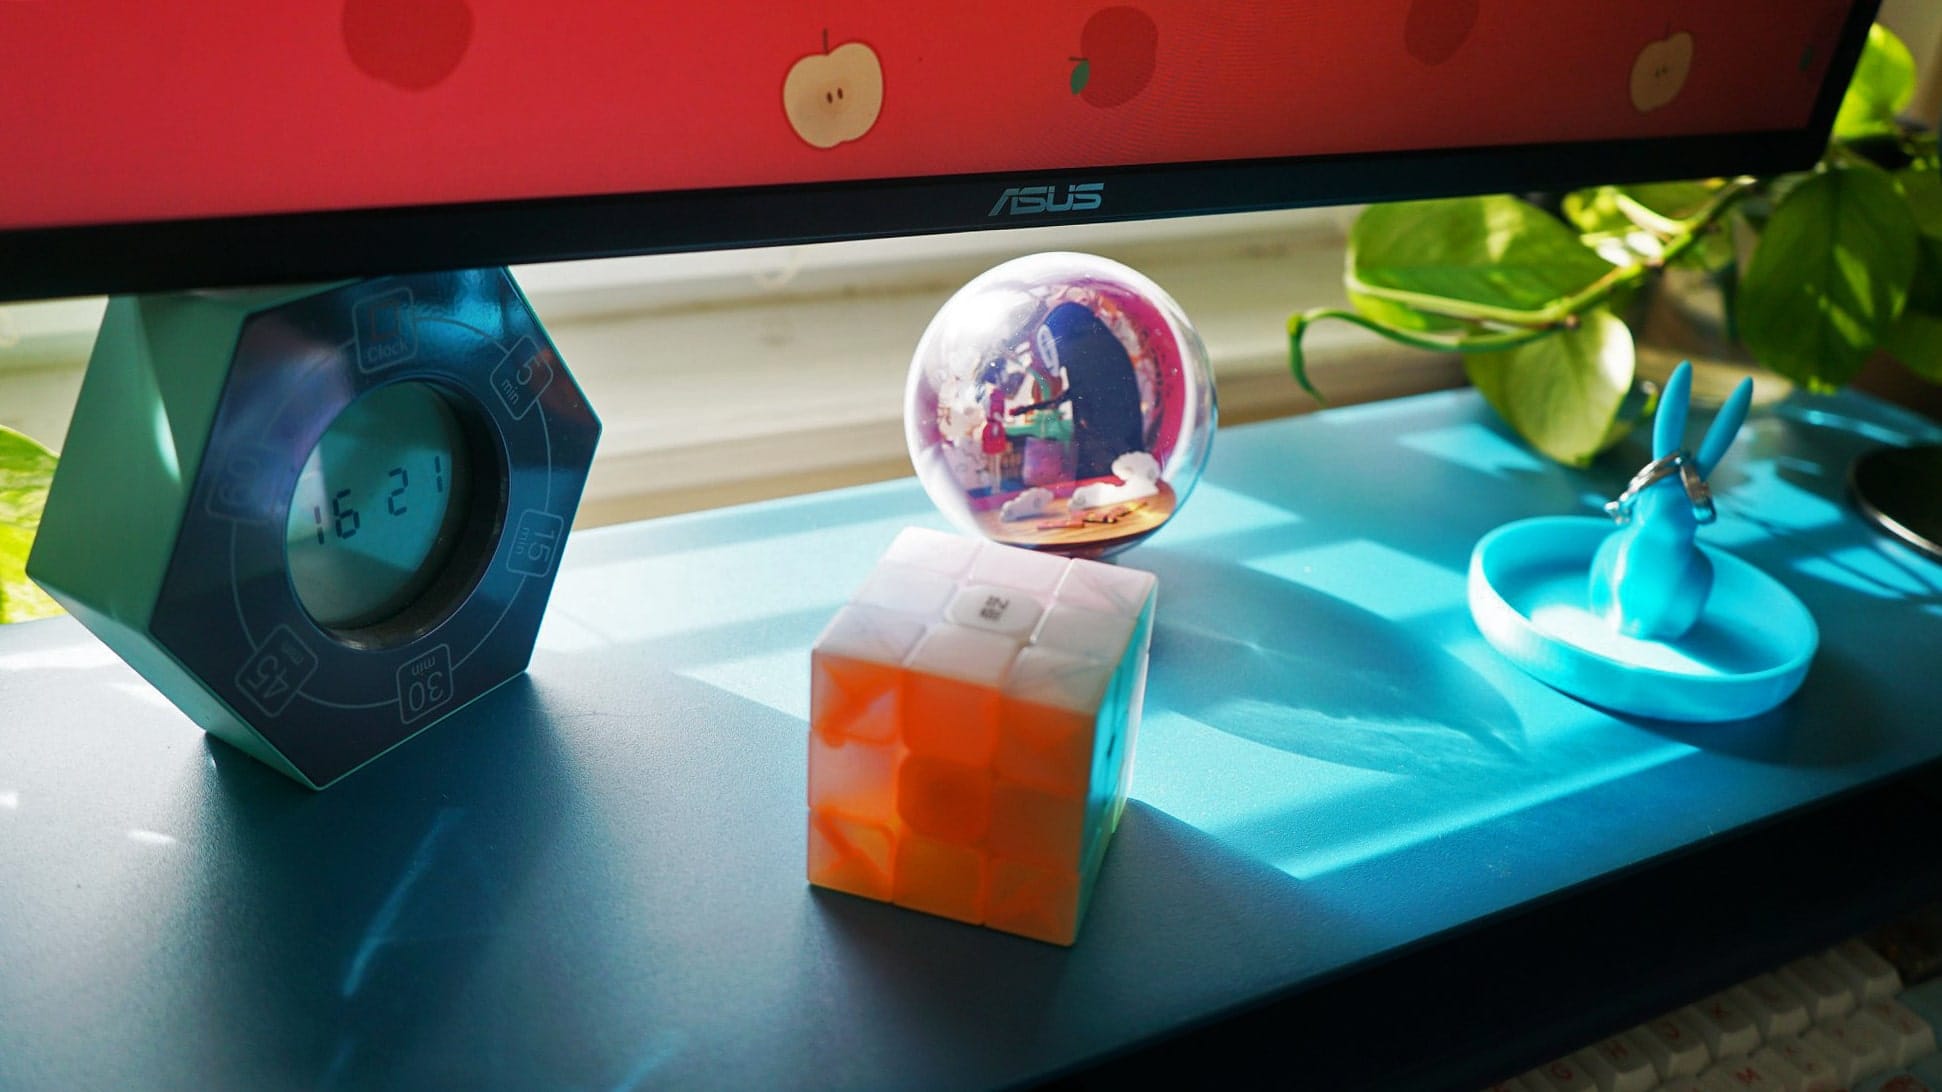 A close-up view of a desk featuring a colourful puzzle cube, a digital clock, a snow globe, and a decorative blue rabbit ring holder